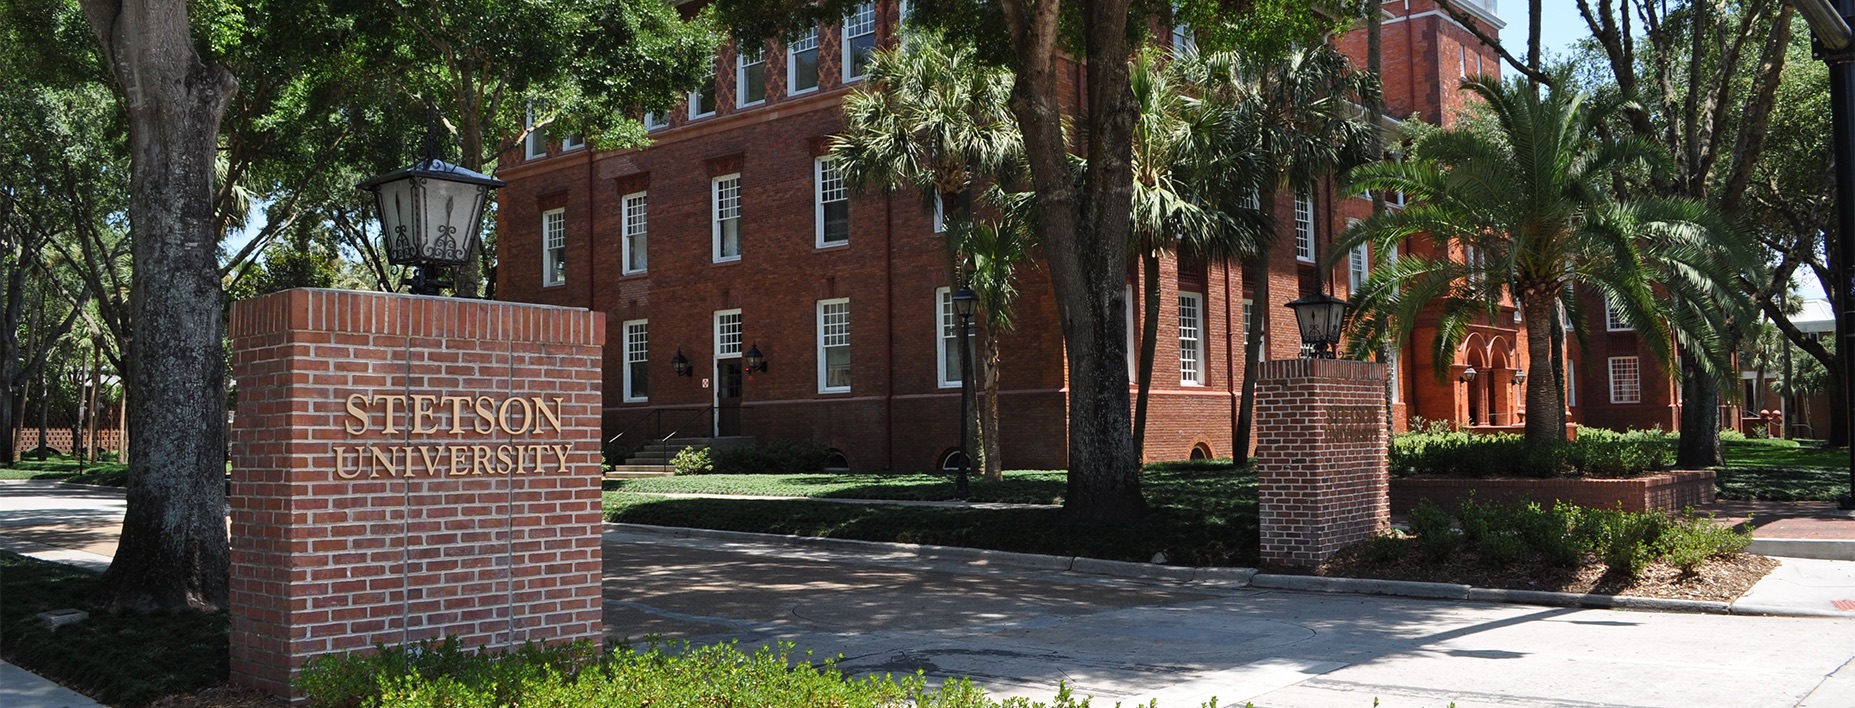 Stetson University front gate with Elizabeth Hall in the background.